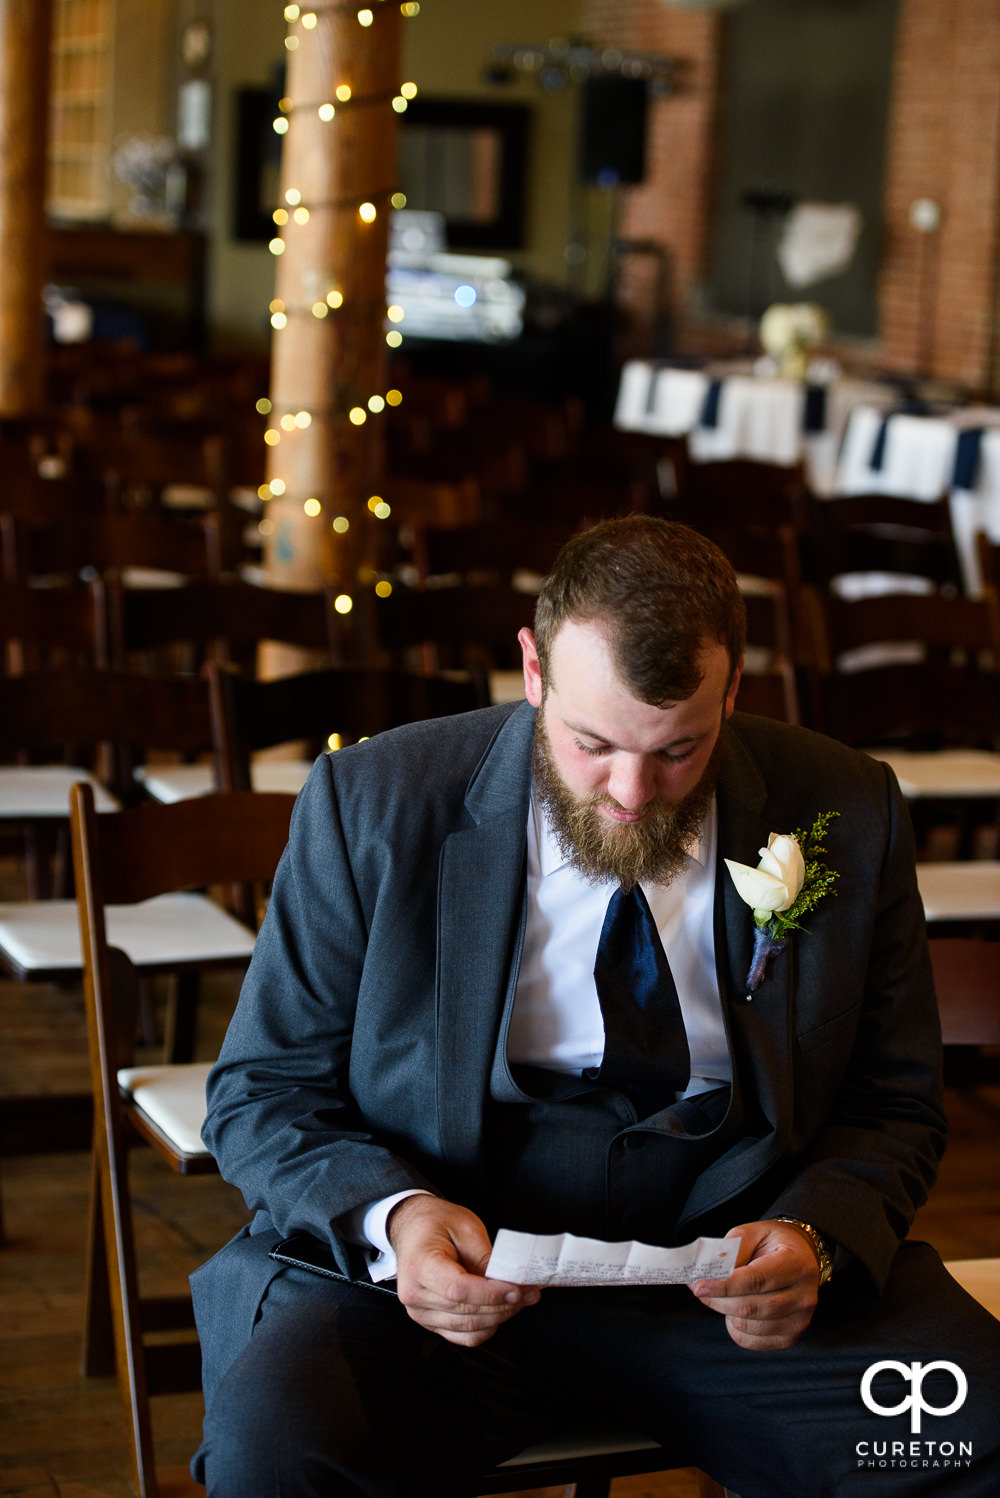 Groom reading a pre-wedding note from his bride.